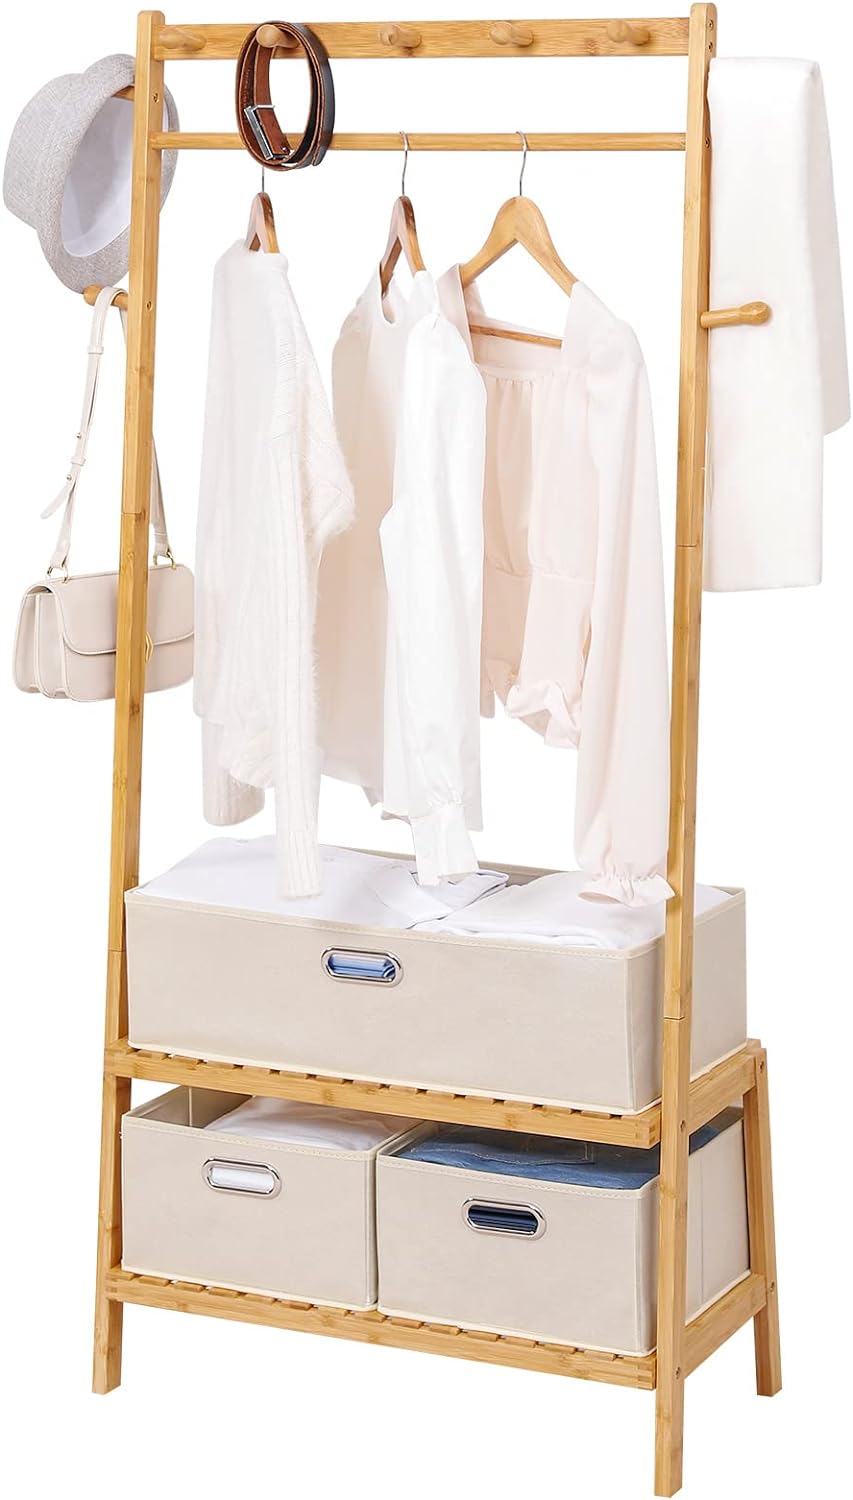 Homde Bamboo Clothing Rack with 3 Storage Box, Garment Rack Clothes Racks for Hanging Clothes, Standing Wardrobe Storage Rack with 2 Organizer Shelves, Portable, Natural